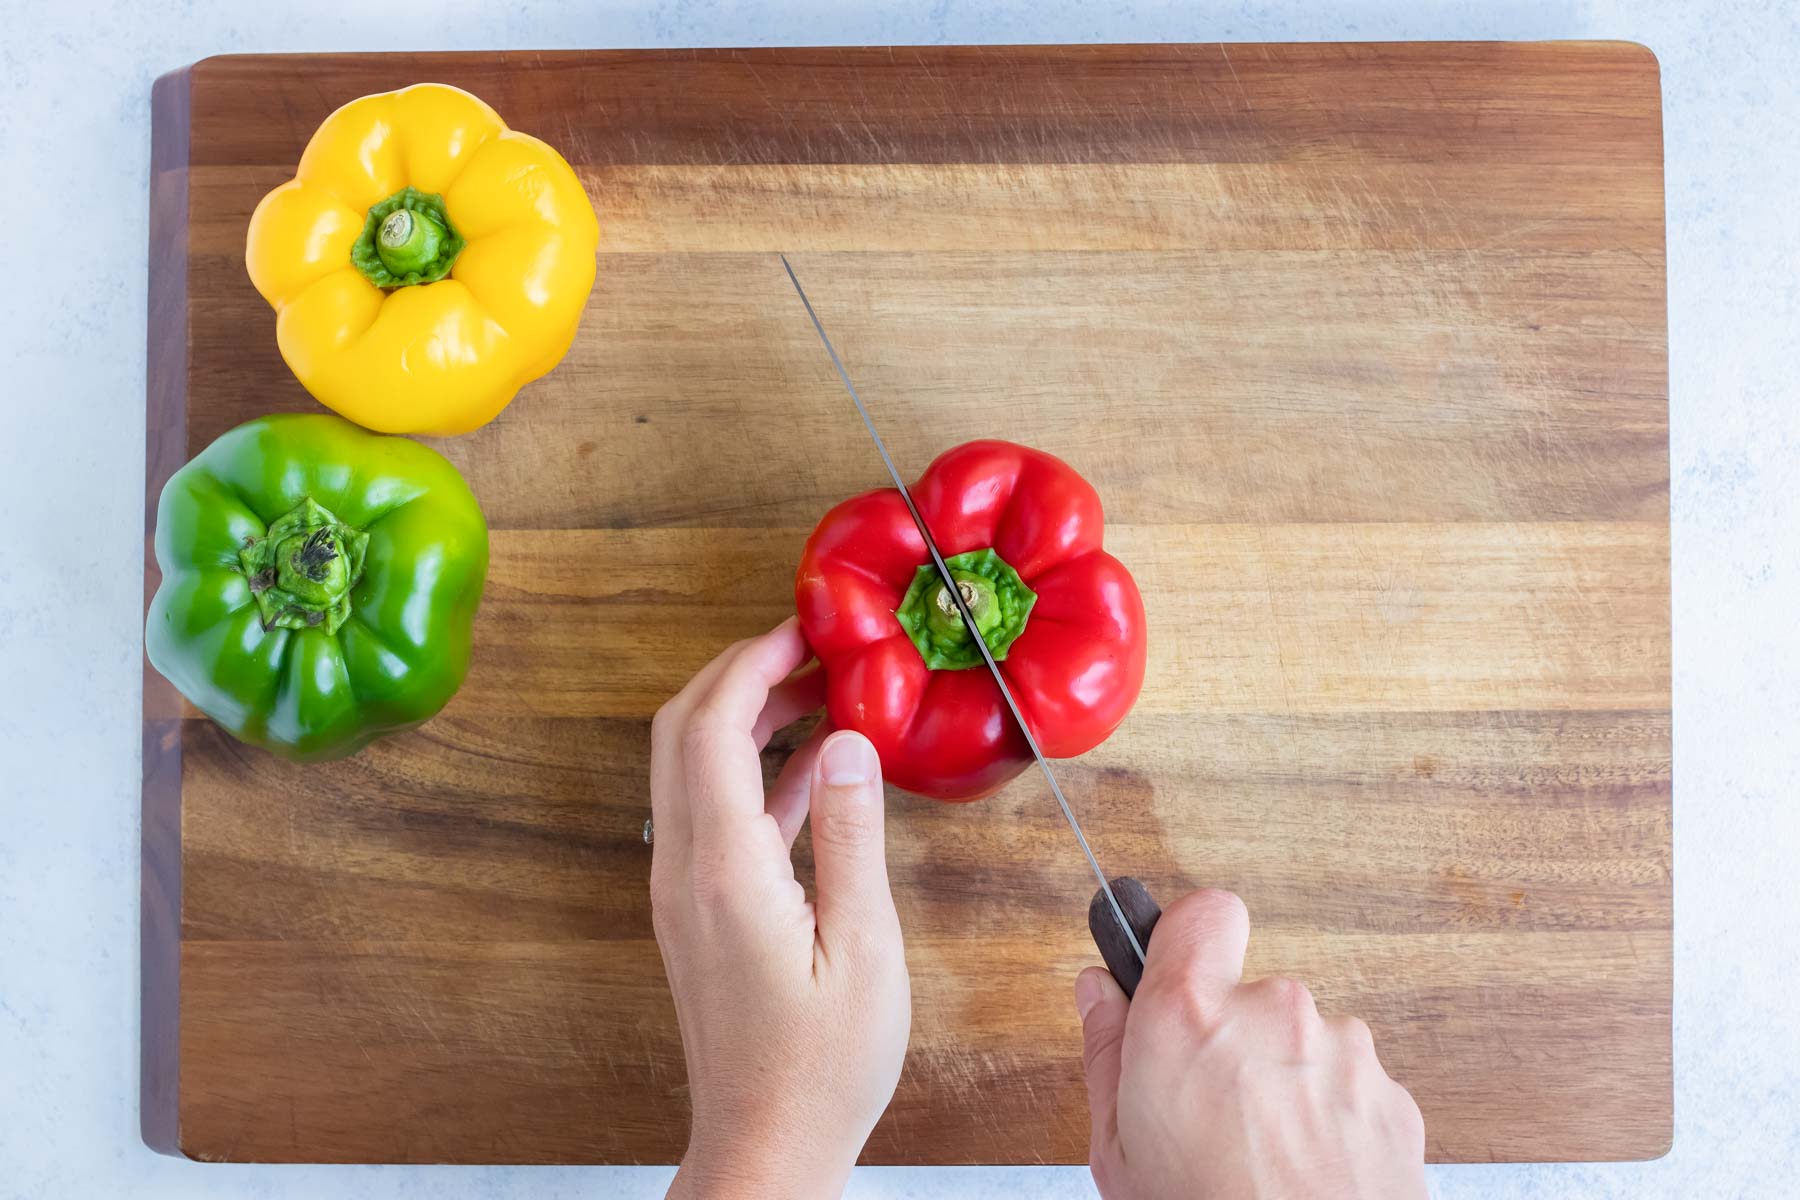 Bell peppers are cut on a cutting board.